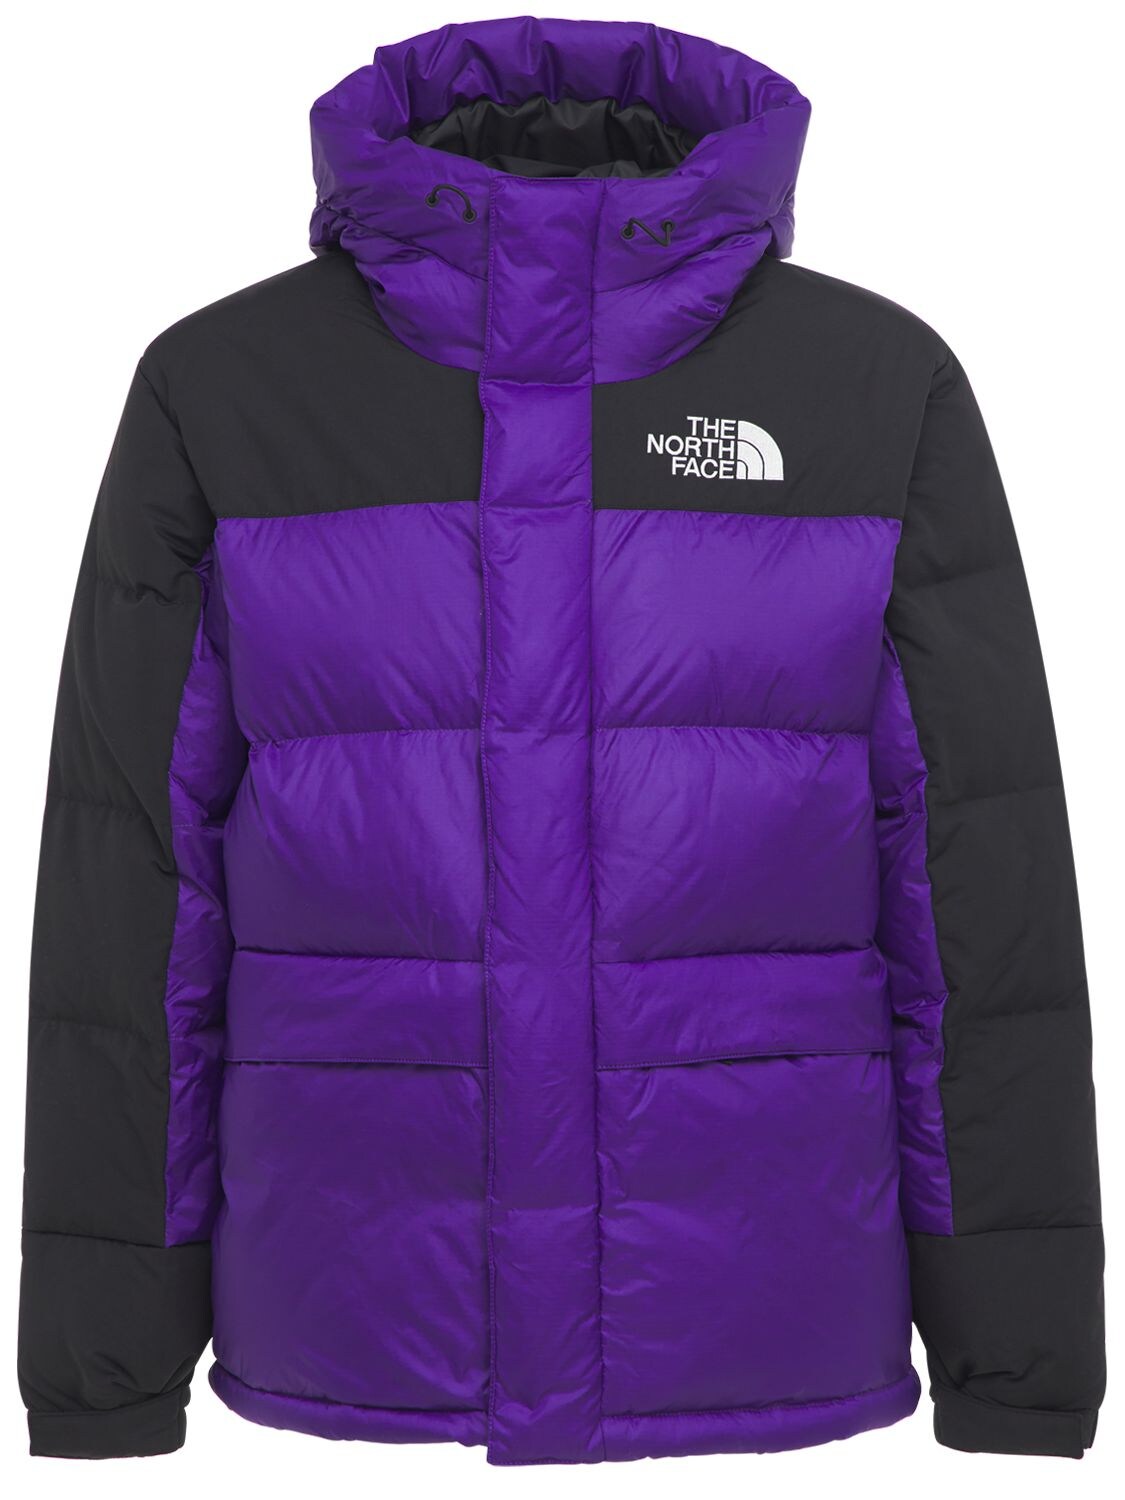 The North Face Himalayan Down Jacket In Peak Purple